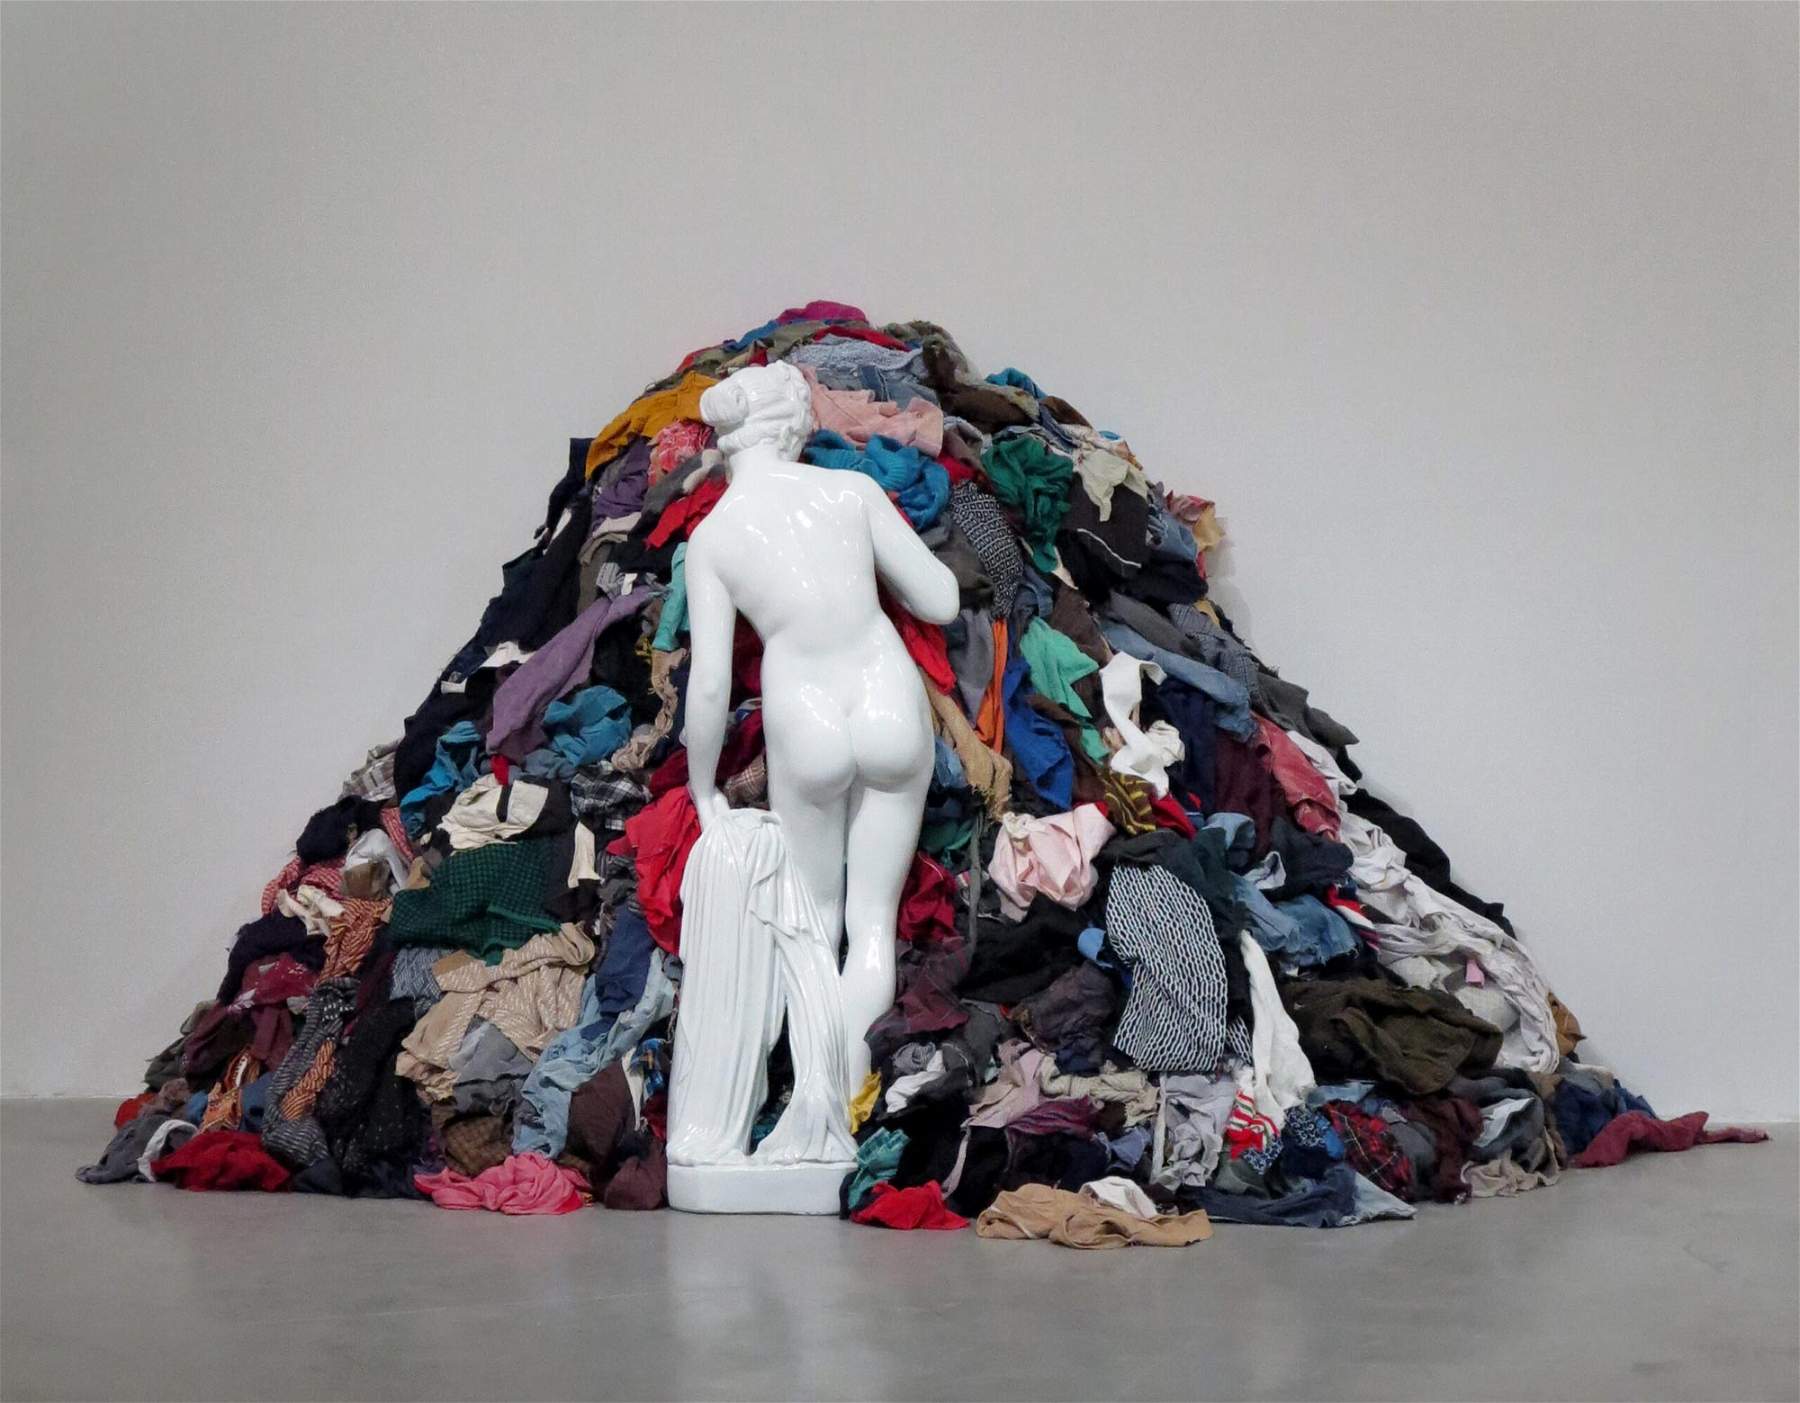 A ten-meter Venus of Rags in the square and many other installations for Napoli Contemporanea 2023 